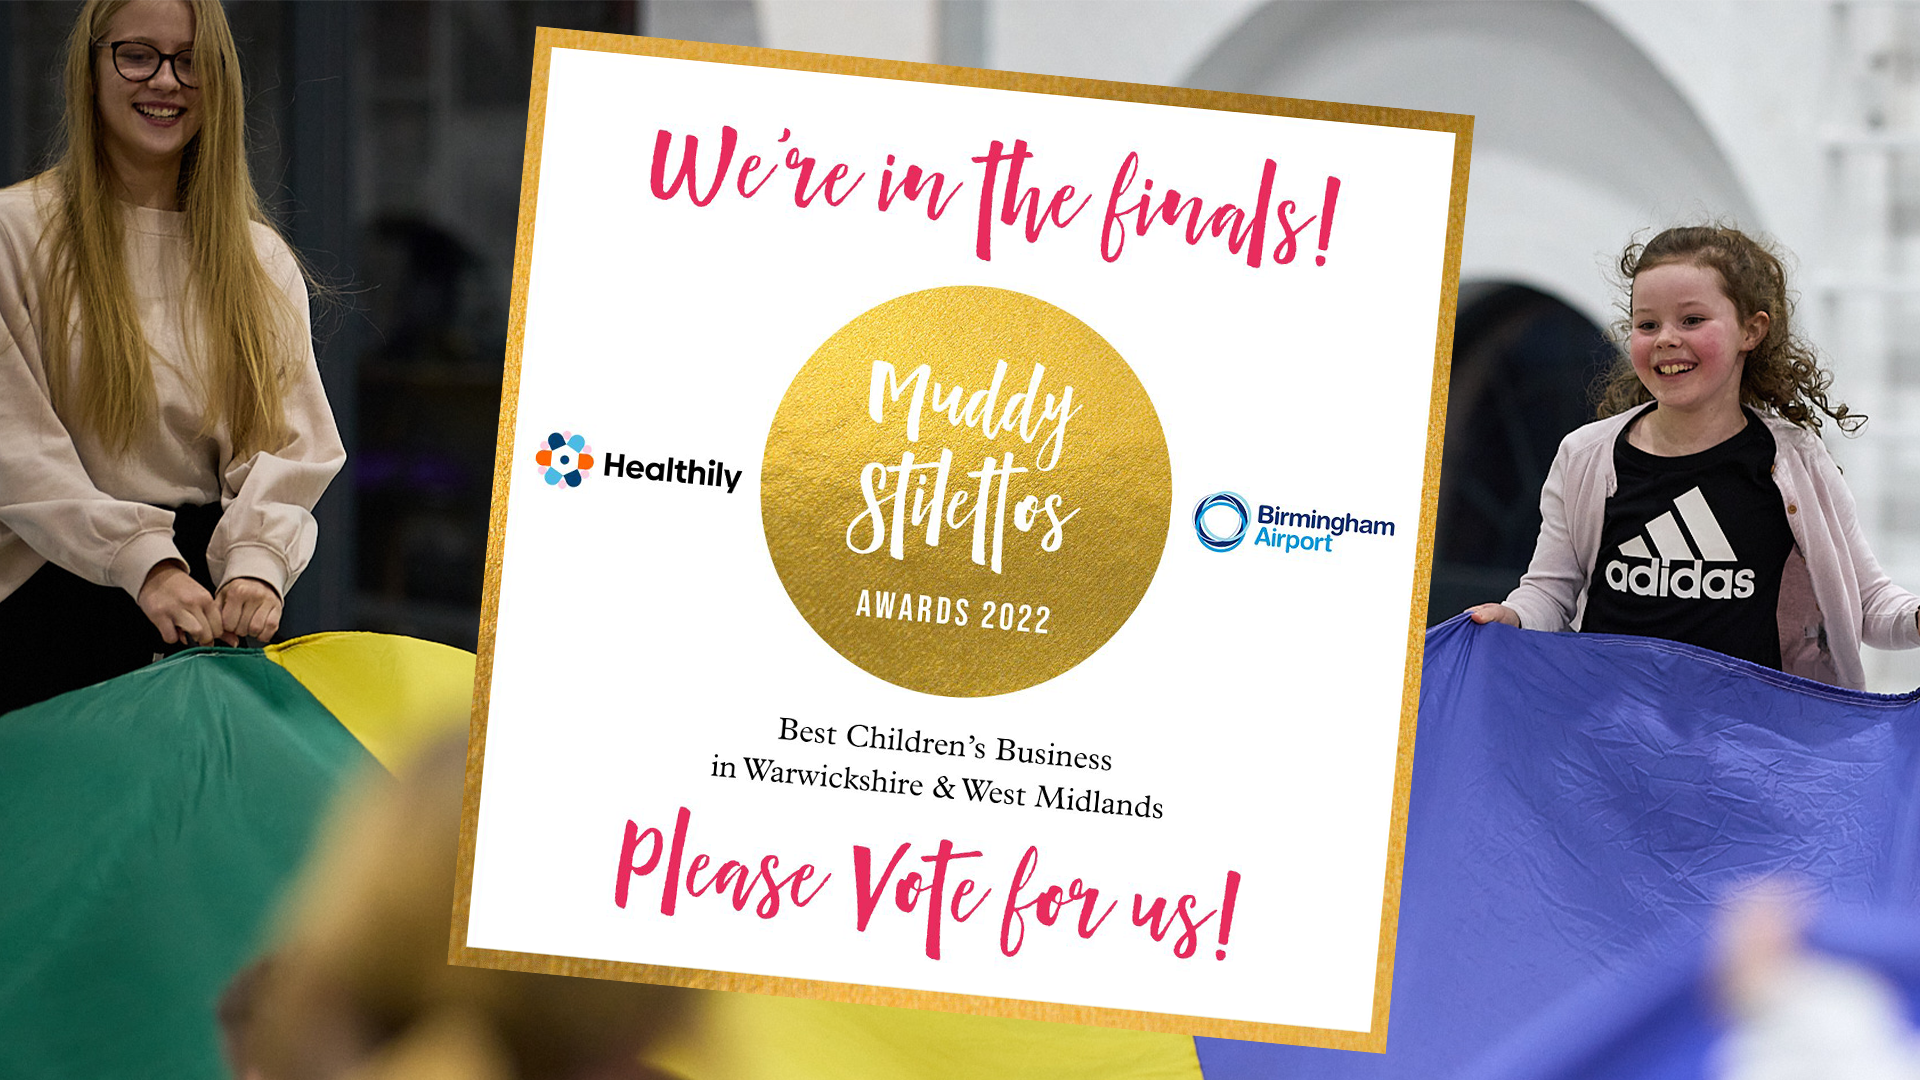 Highly Sprung in the finals for ‘Best Children’s Business’ – vote for Sprung Youth!